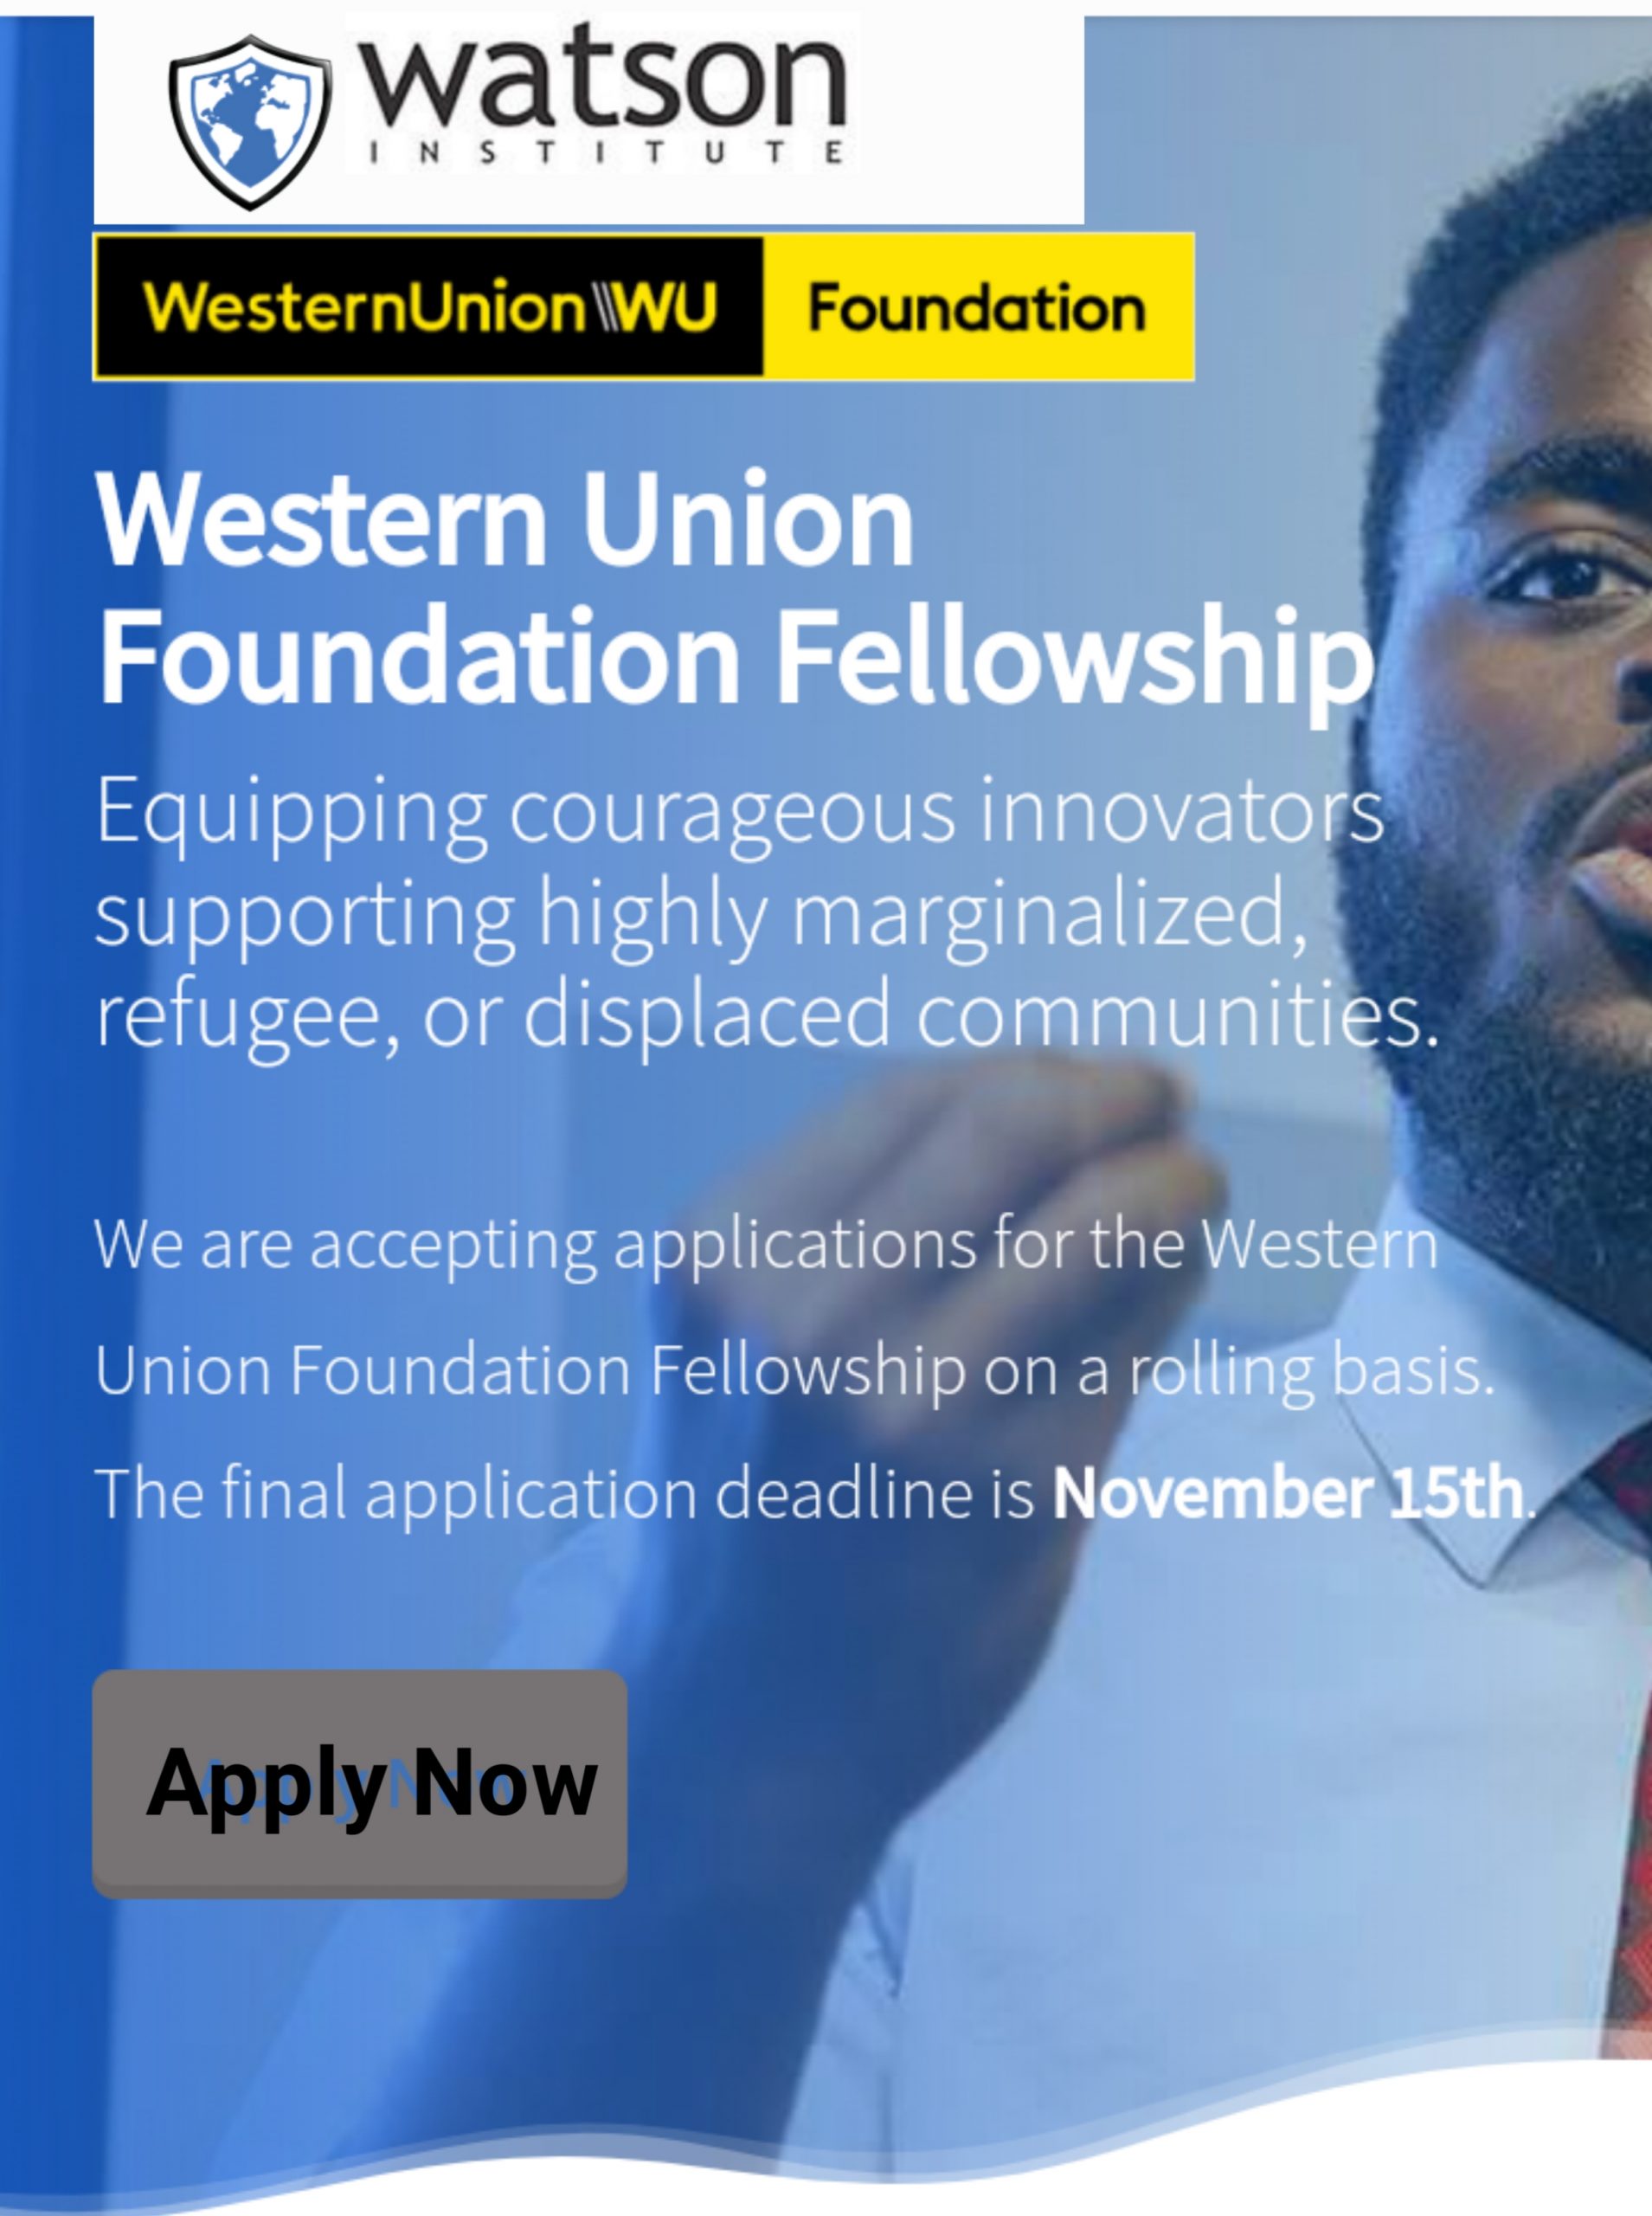 20221008 202121 scaled - Watson Western Union Foundation Fellowship for Young Entrepreneurs and Community Leaders in 2023